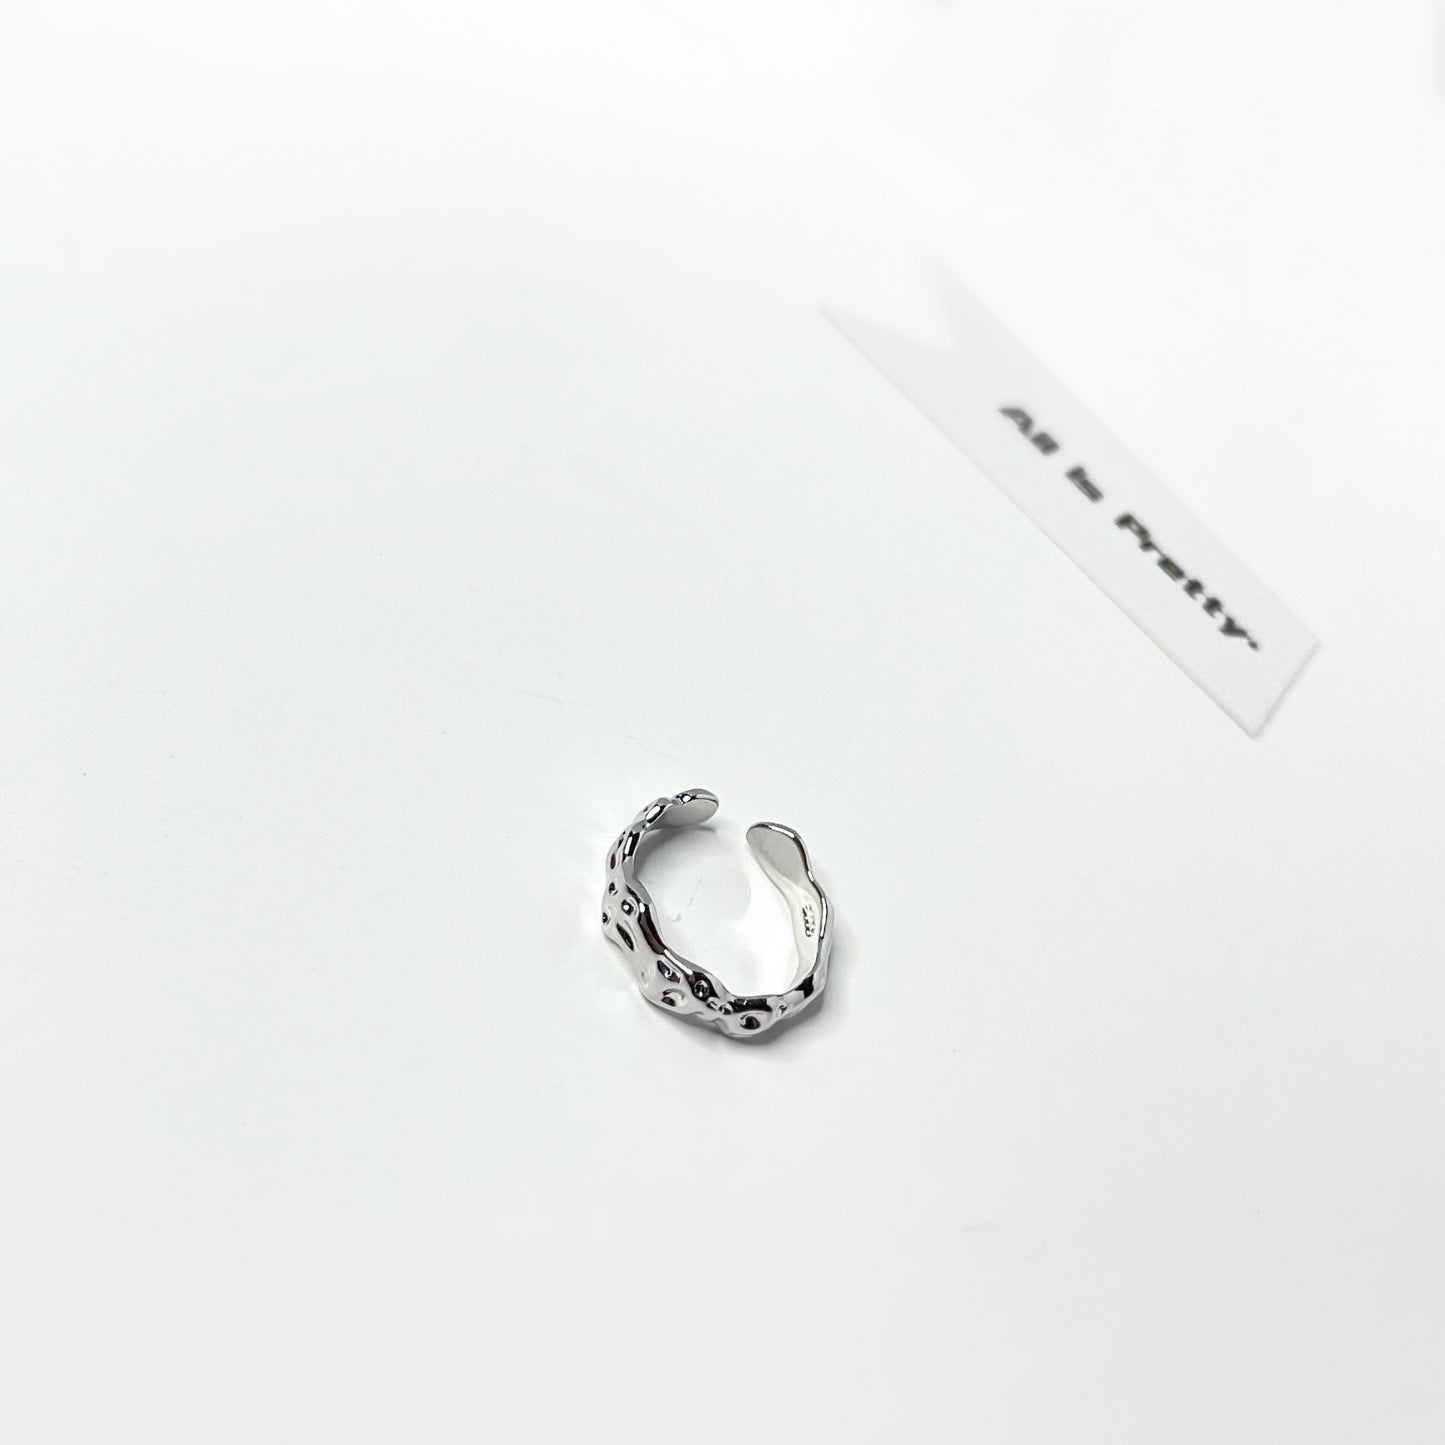 Textured band ring